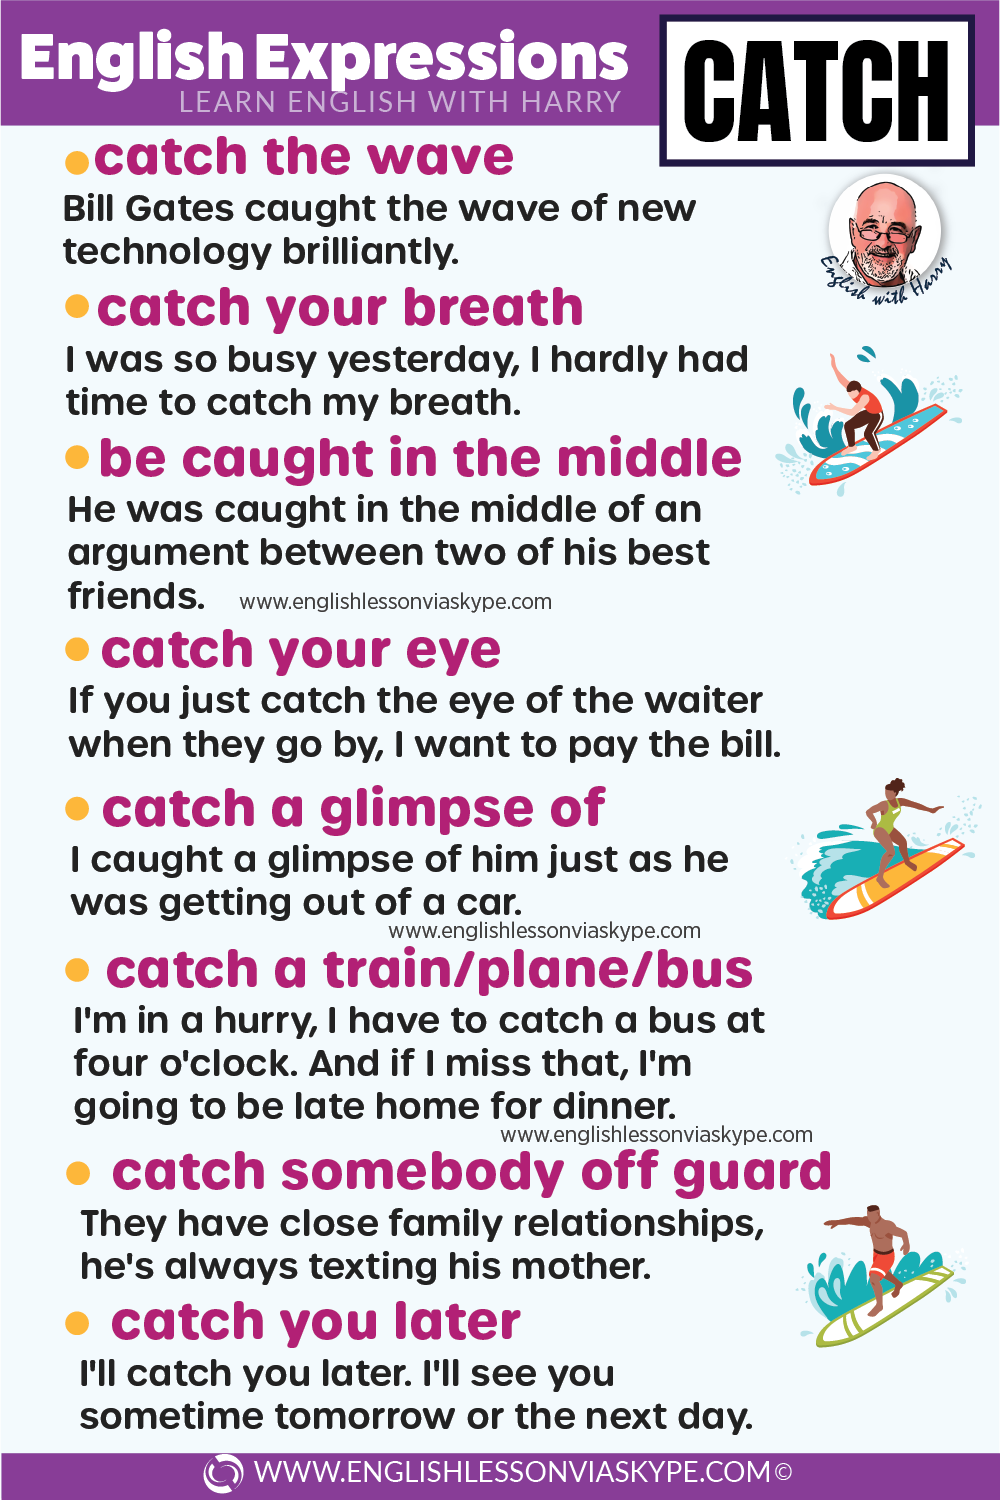 English expressions with catch. Advanced English learning. English lessons on Zoom at www.englishlessonviaskype.com #learnenglish #englishlessons #EnglishTeacher #vocabulary #ingles